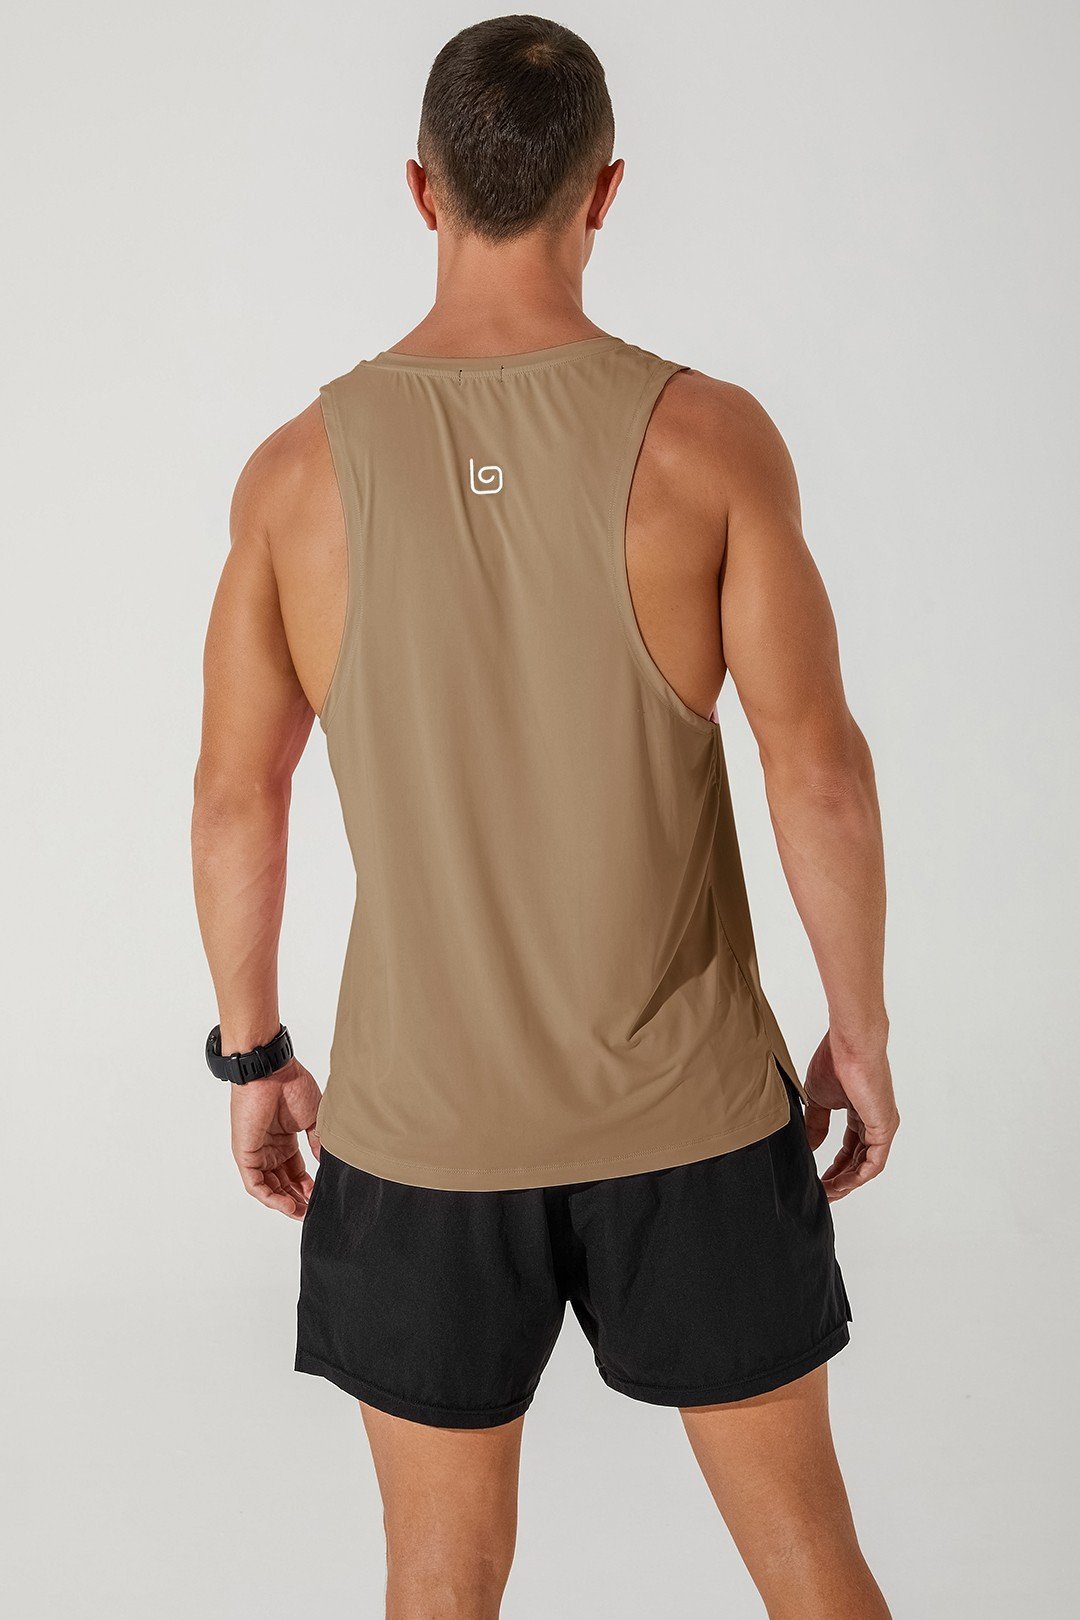 Ricard Tank Men's Tank Top in Cappuccino Beige - Stylish and Comfortable Fashion Choice.